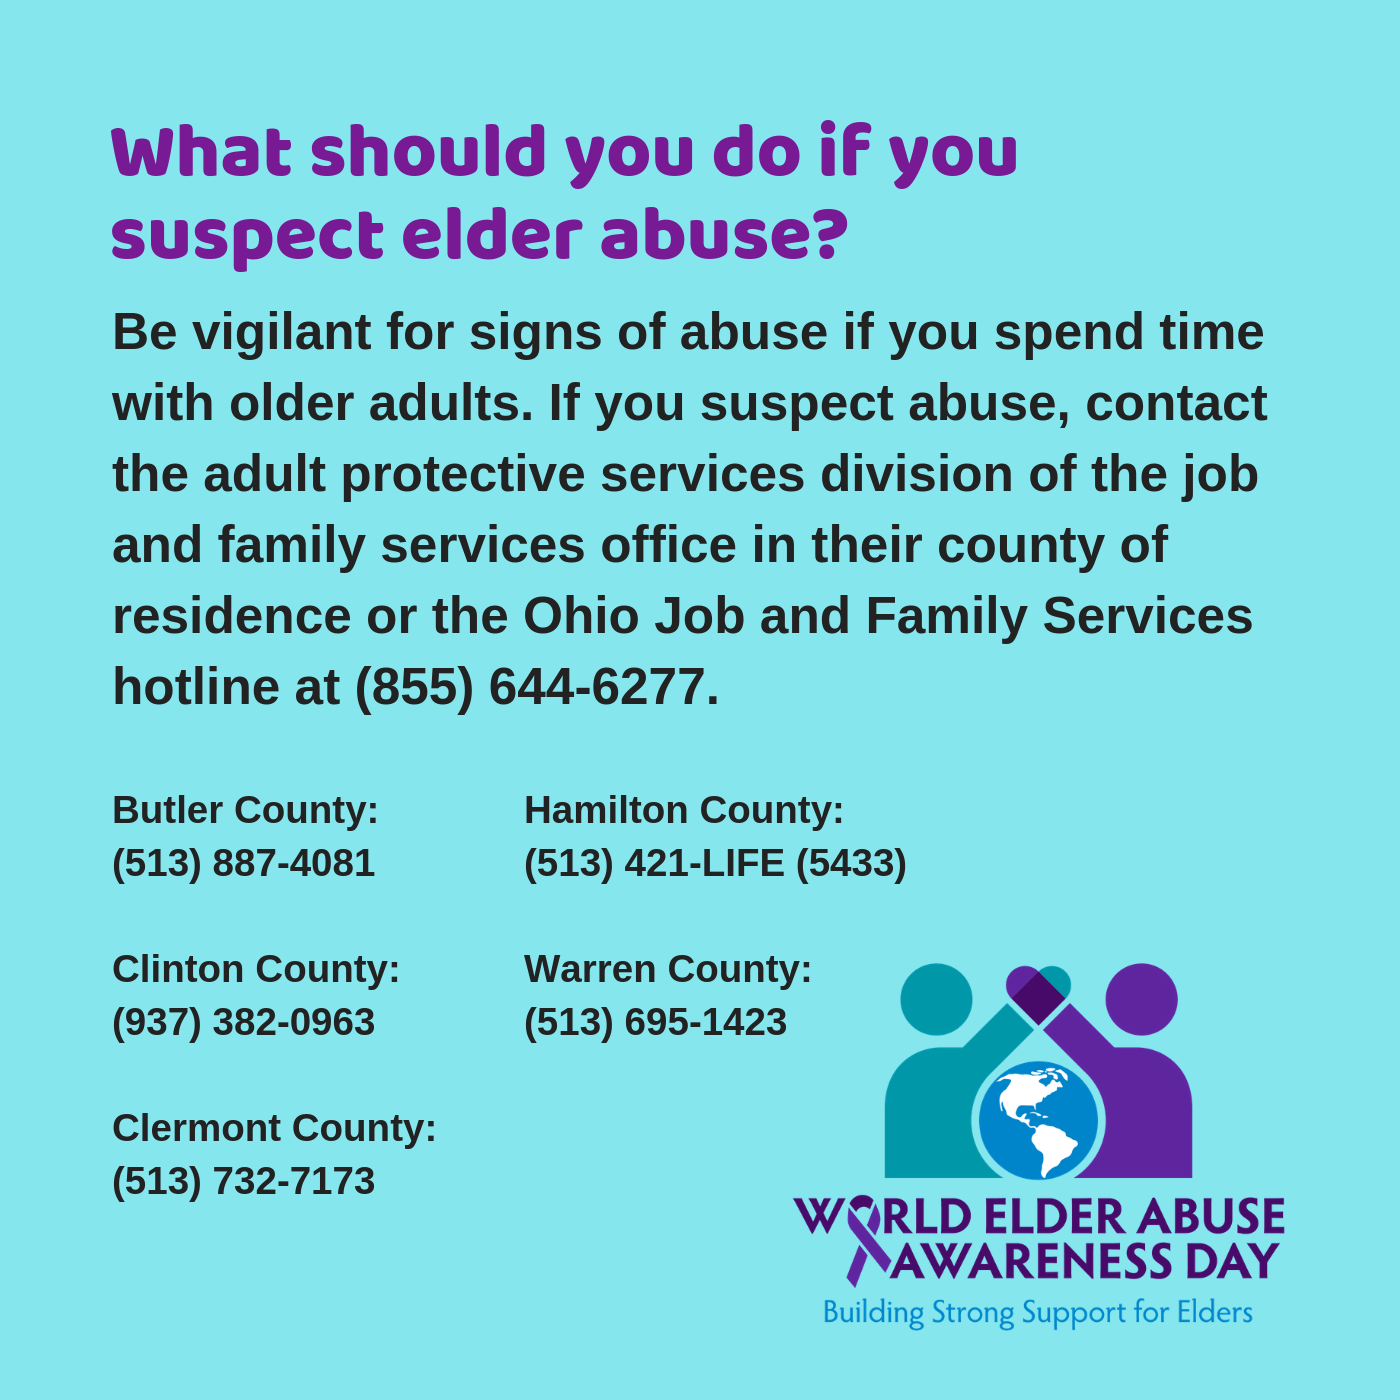 Adult Protective Services phone numbers